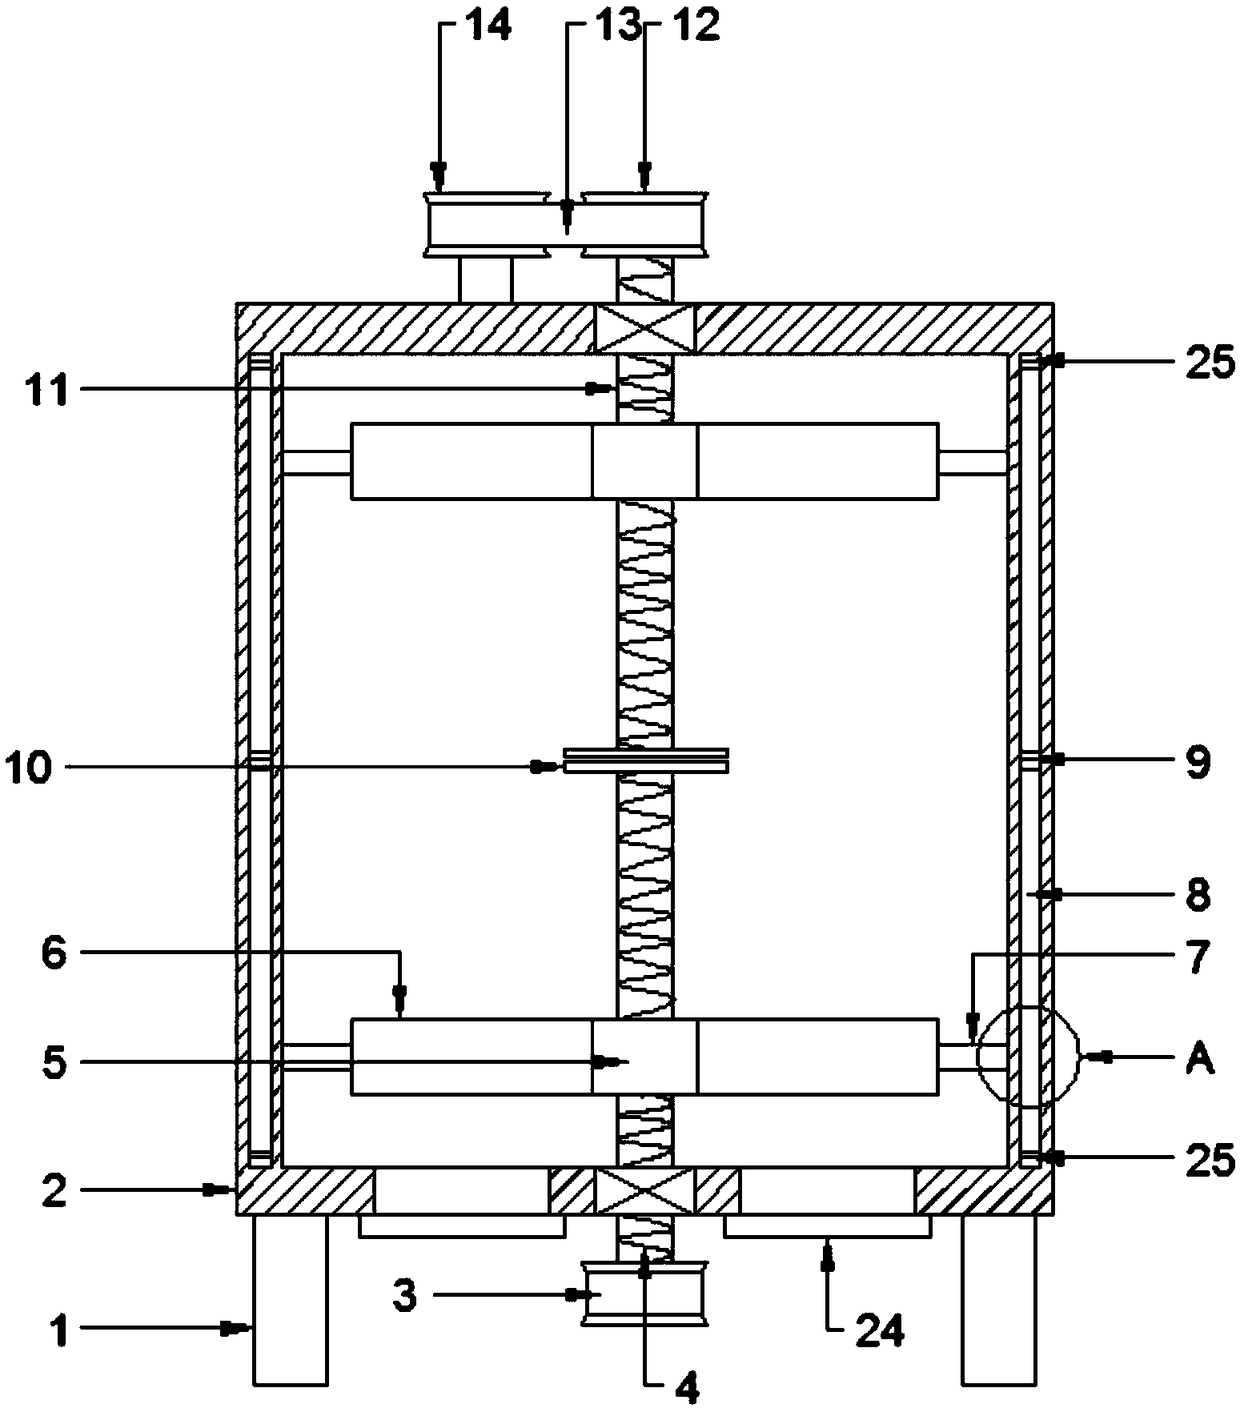 Bidirectional linkage grinding soaking device for waste paperboards